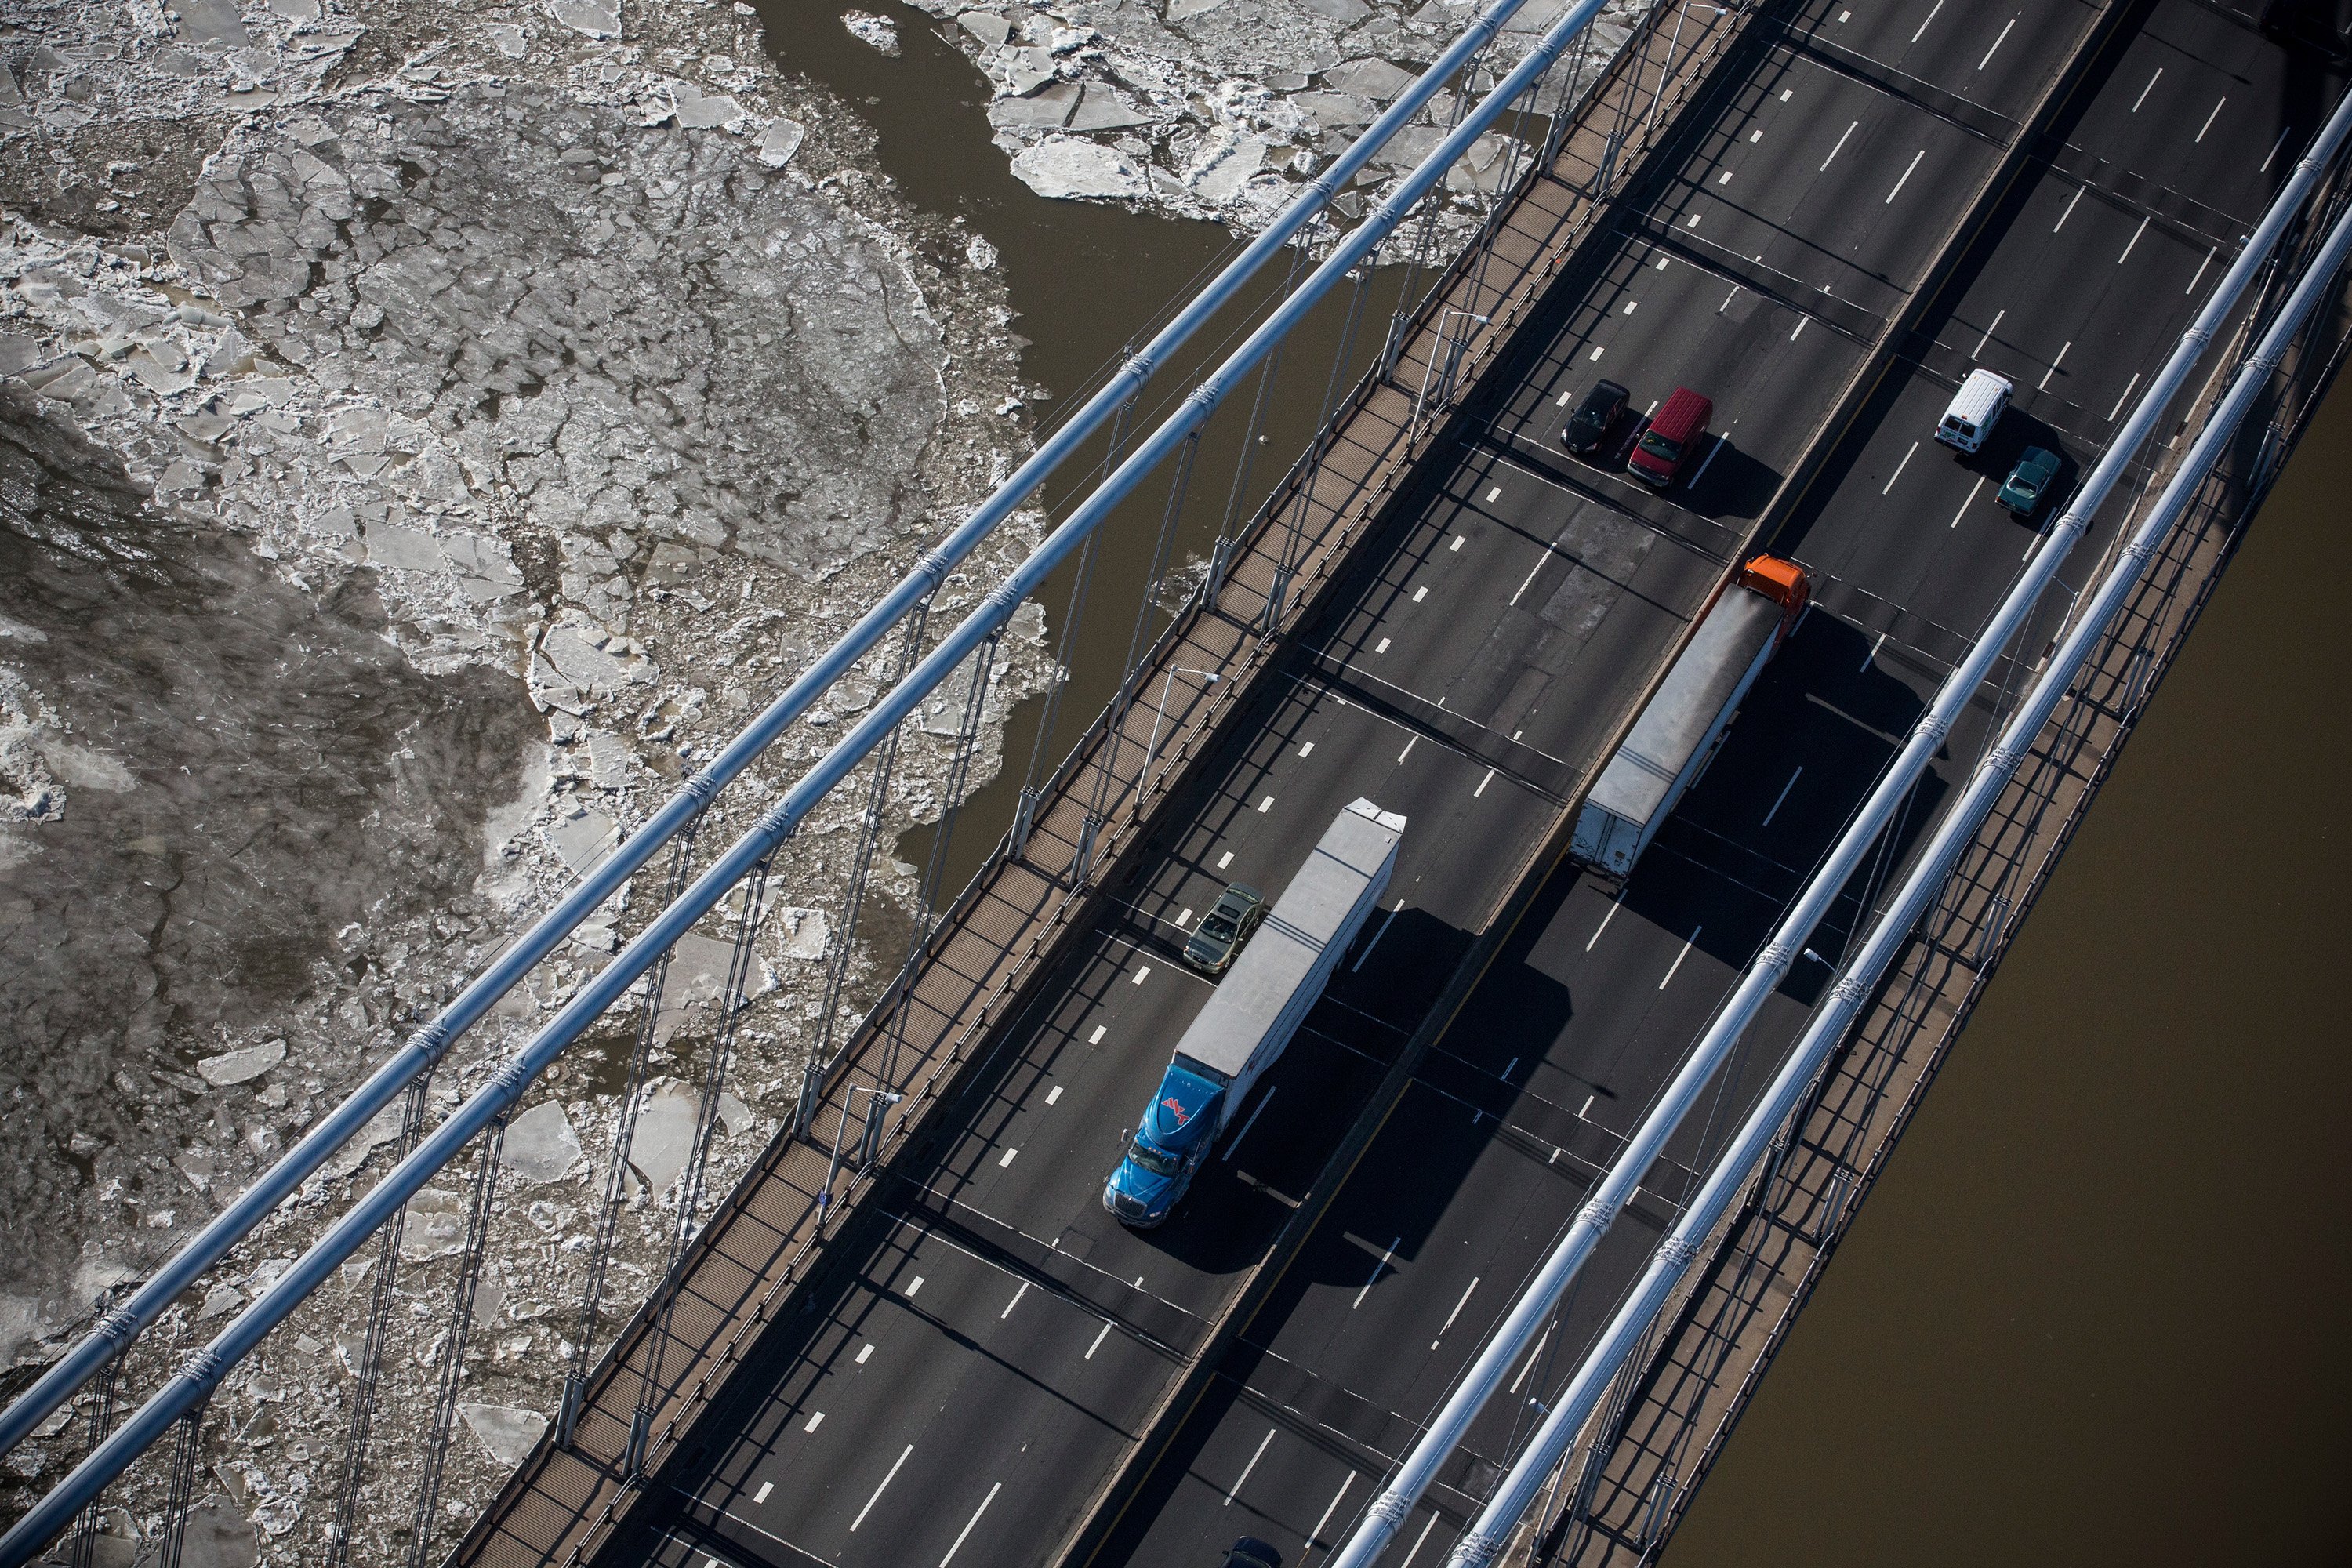 Traffic drives across the George Washington Bridge on January 9, 2014 in Fort Lee, N.J. (Andrew Burton / Getty Images)